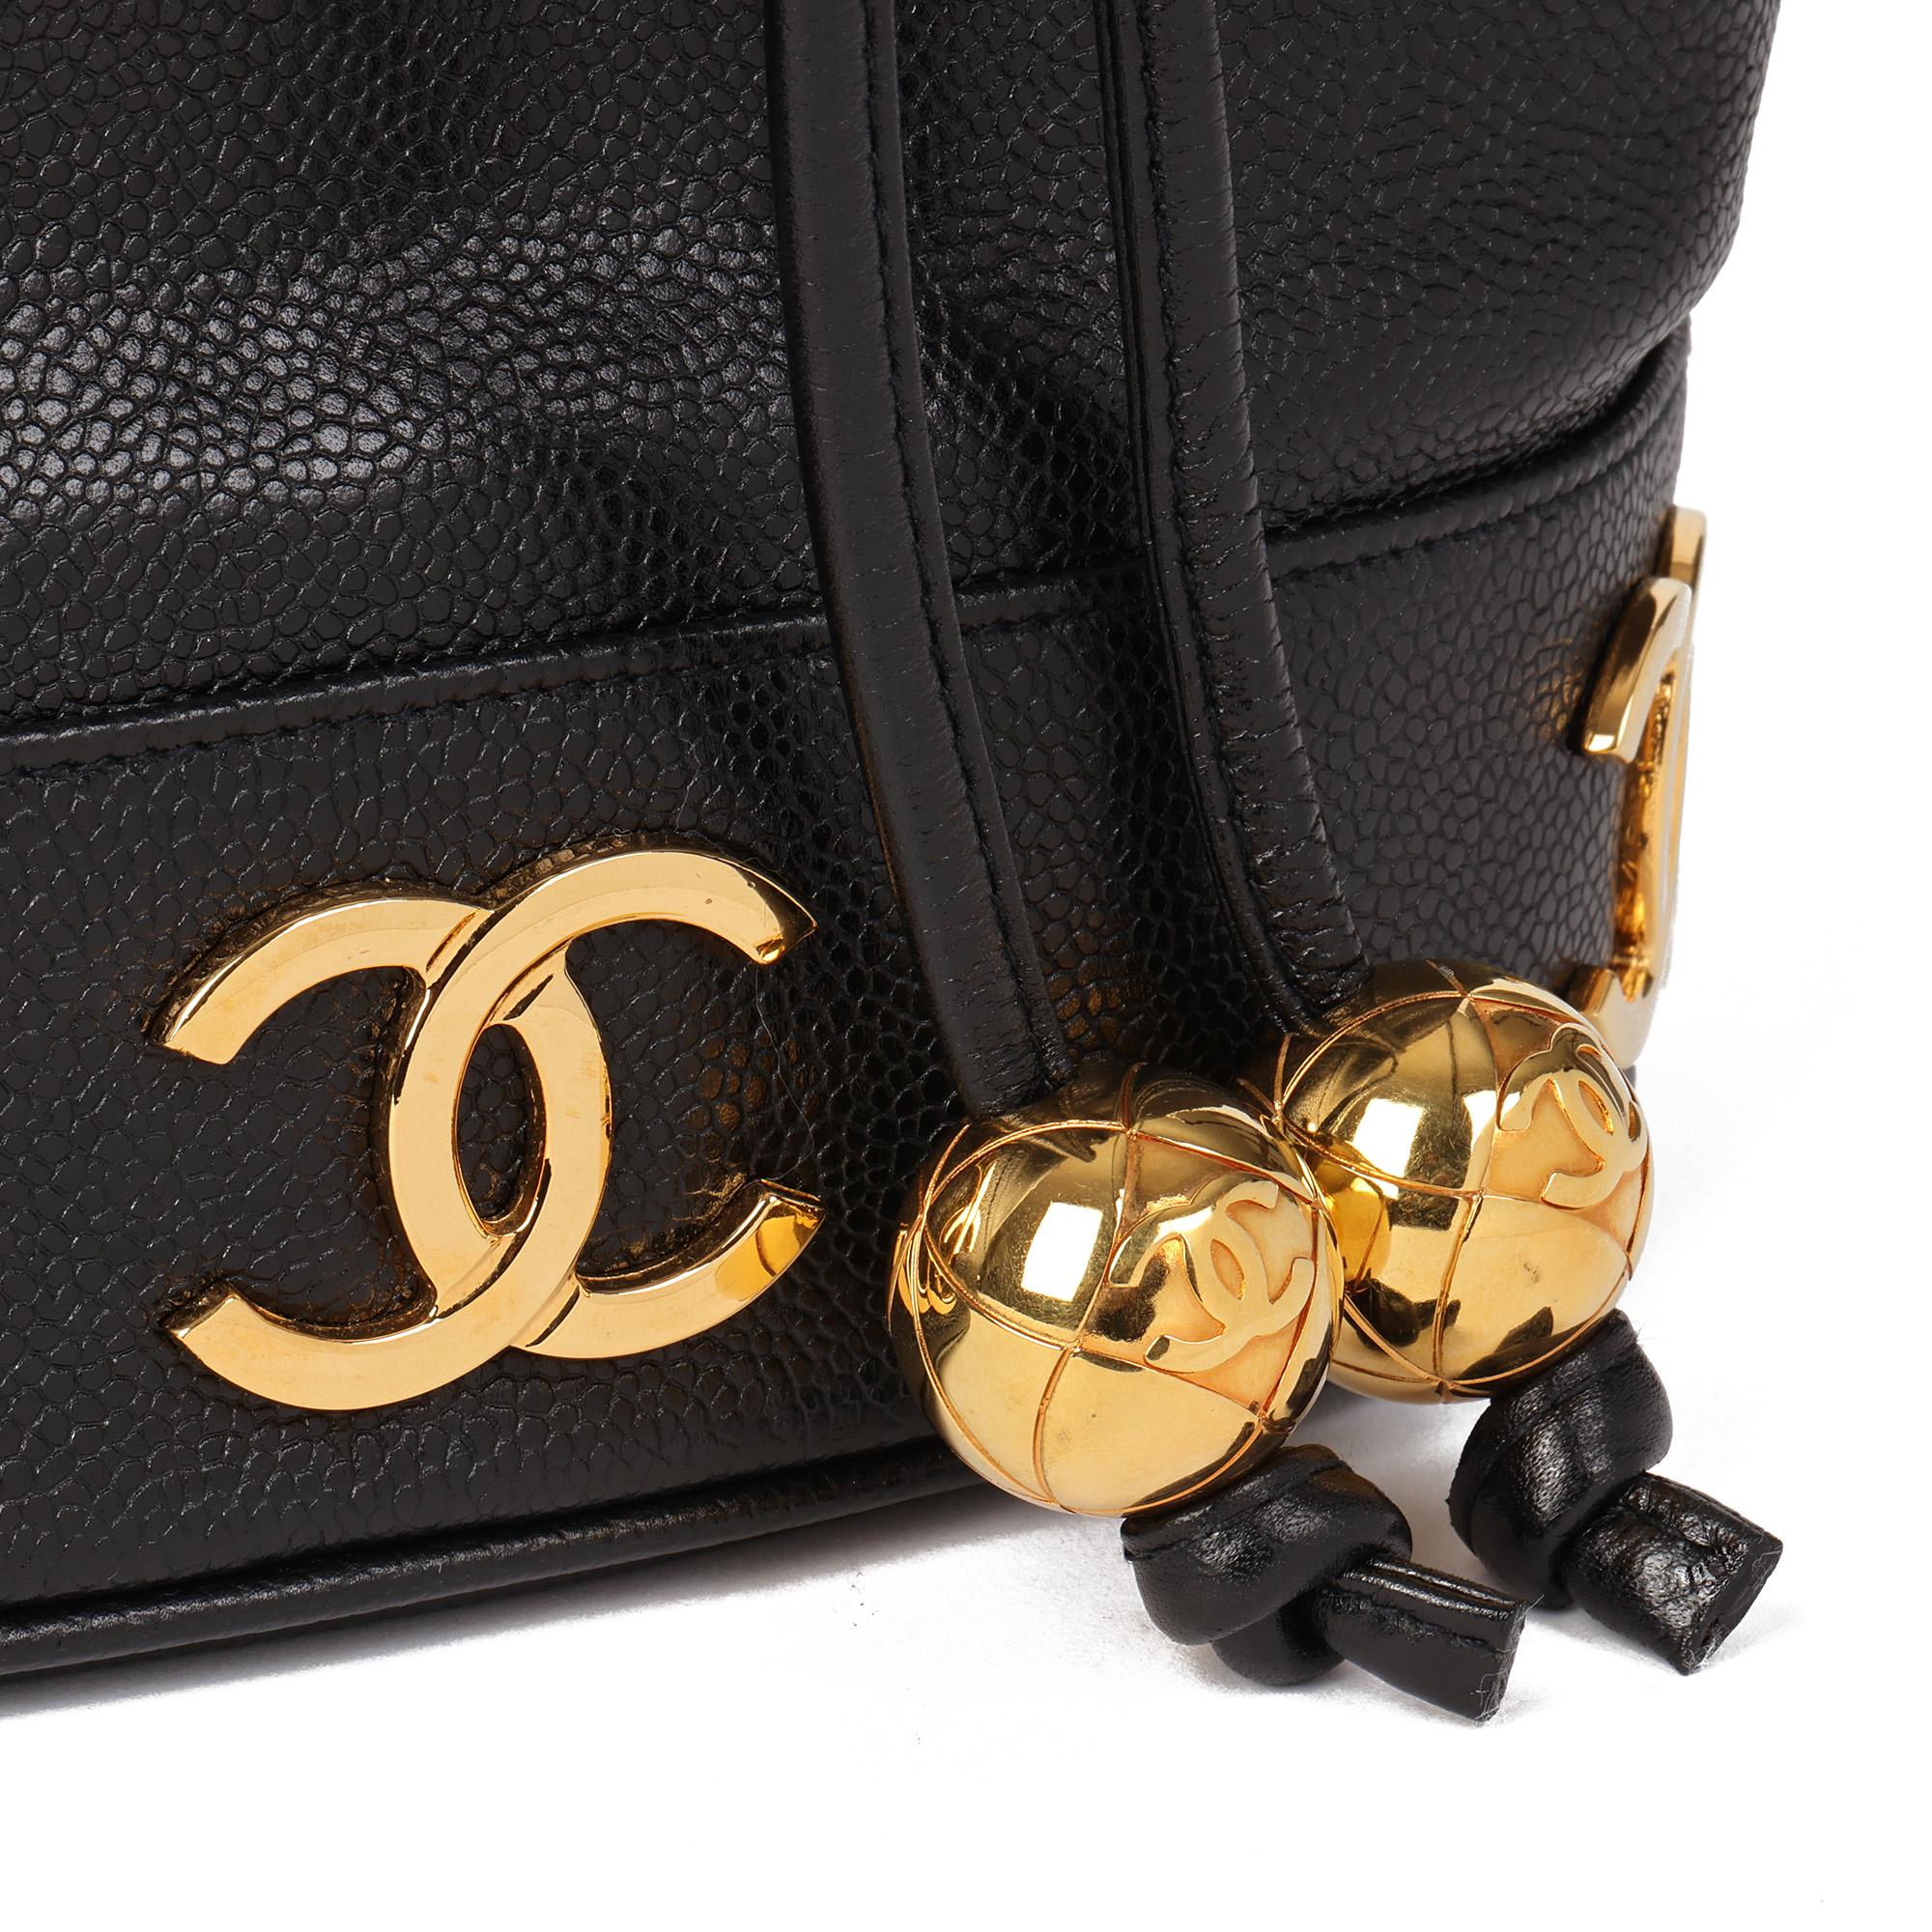 CHANEL Black Caviar Leather Vintage Logo Trim Bucket Bag with Pouch 2